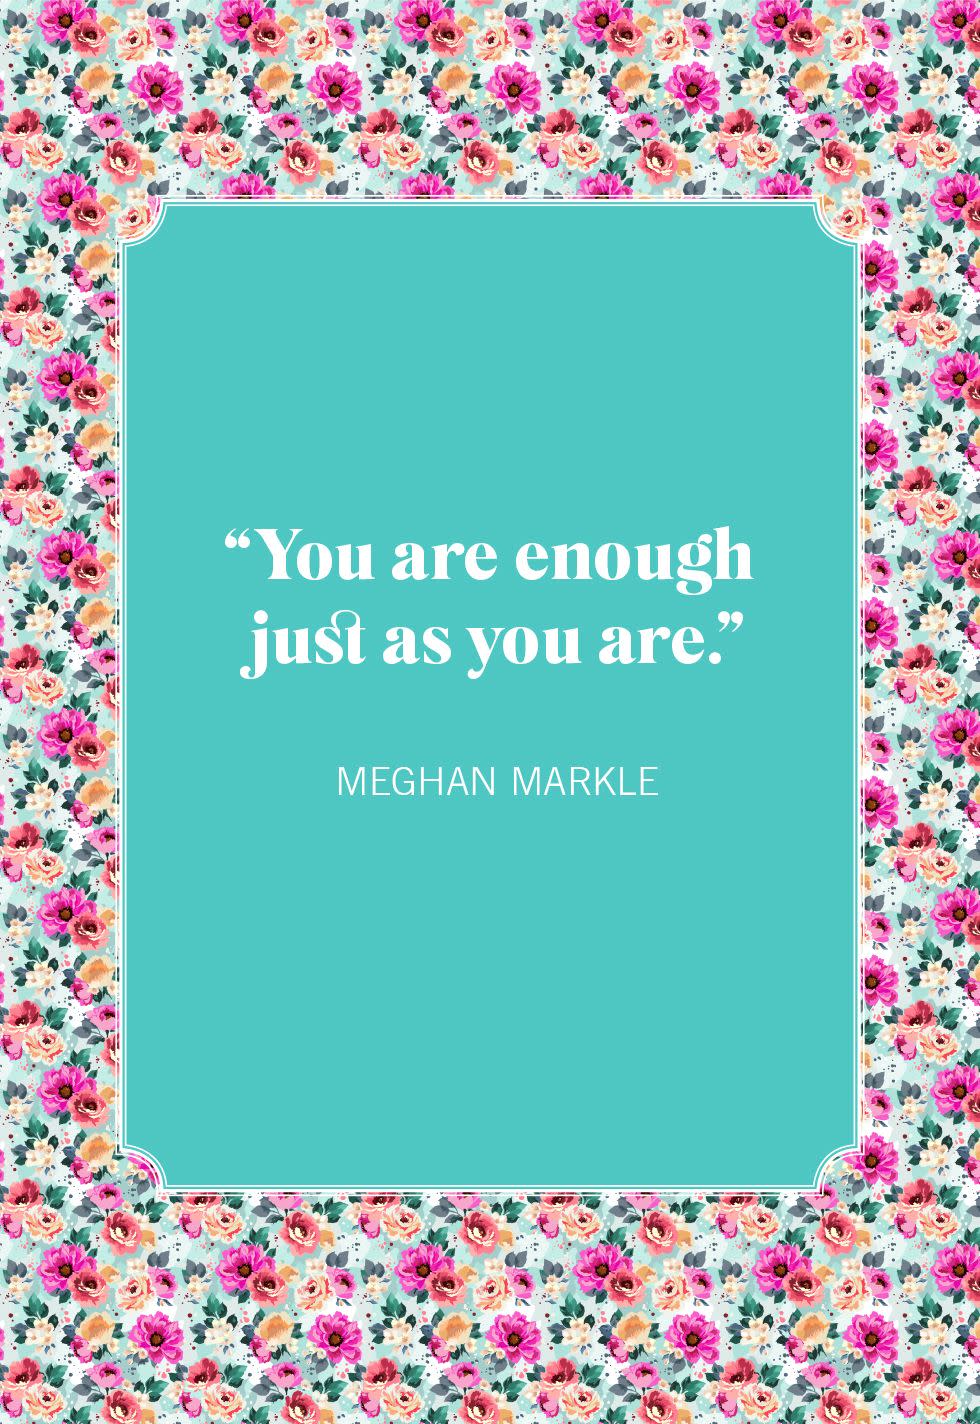 meghan markle short inspirational quotes